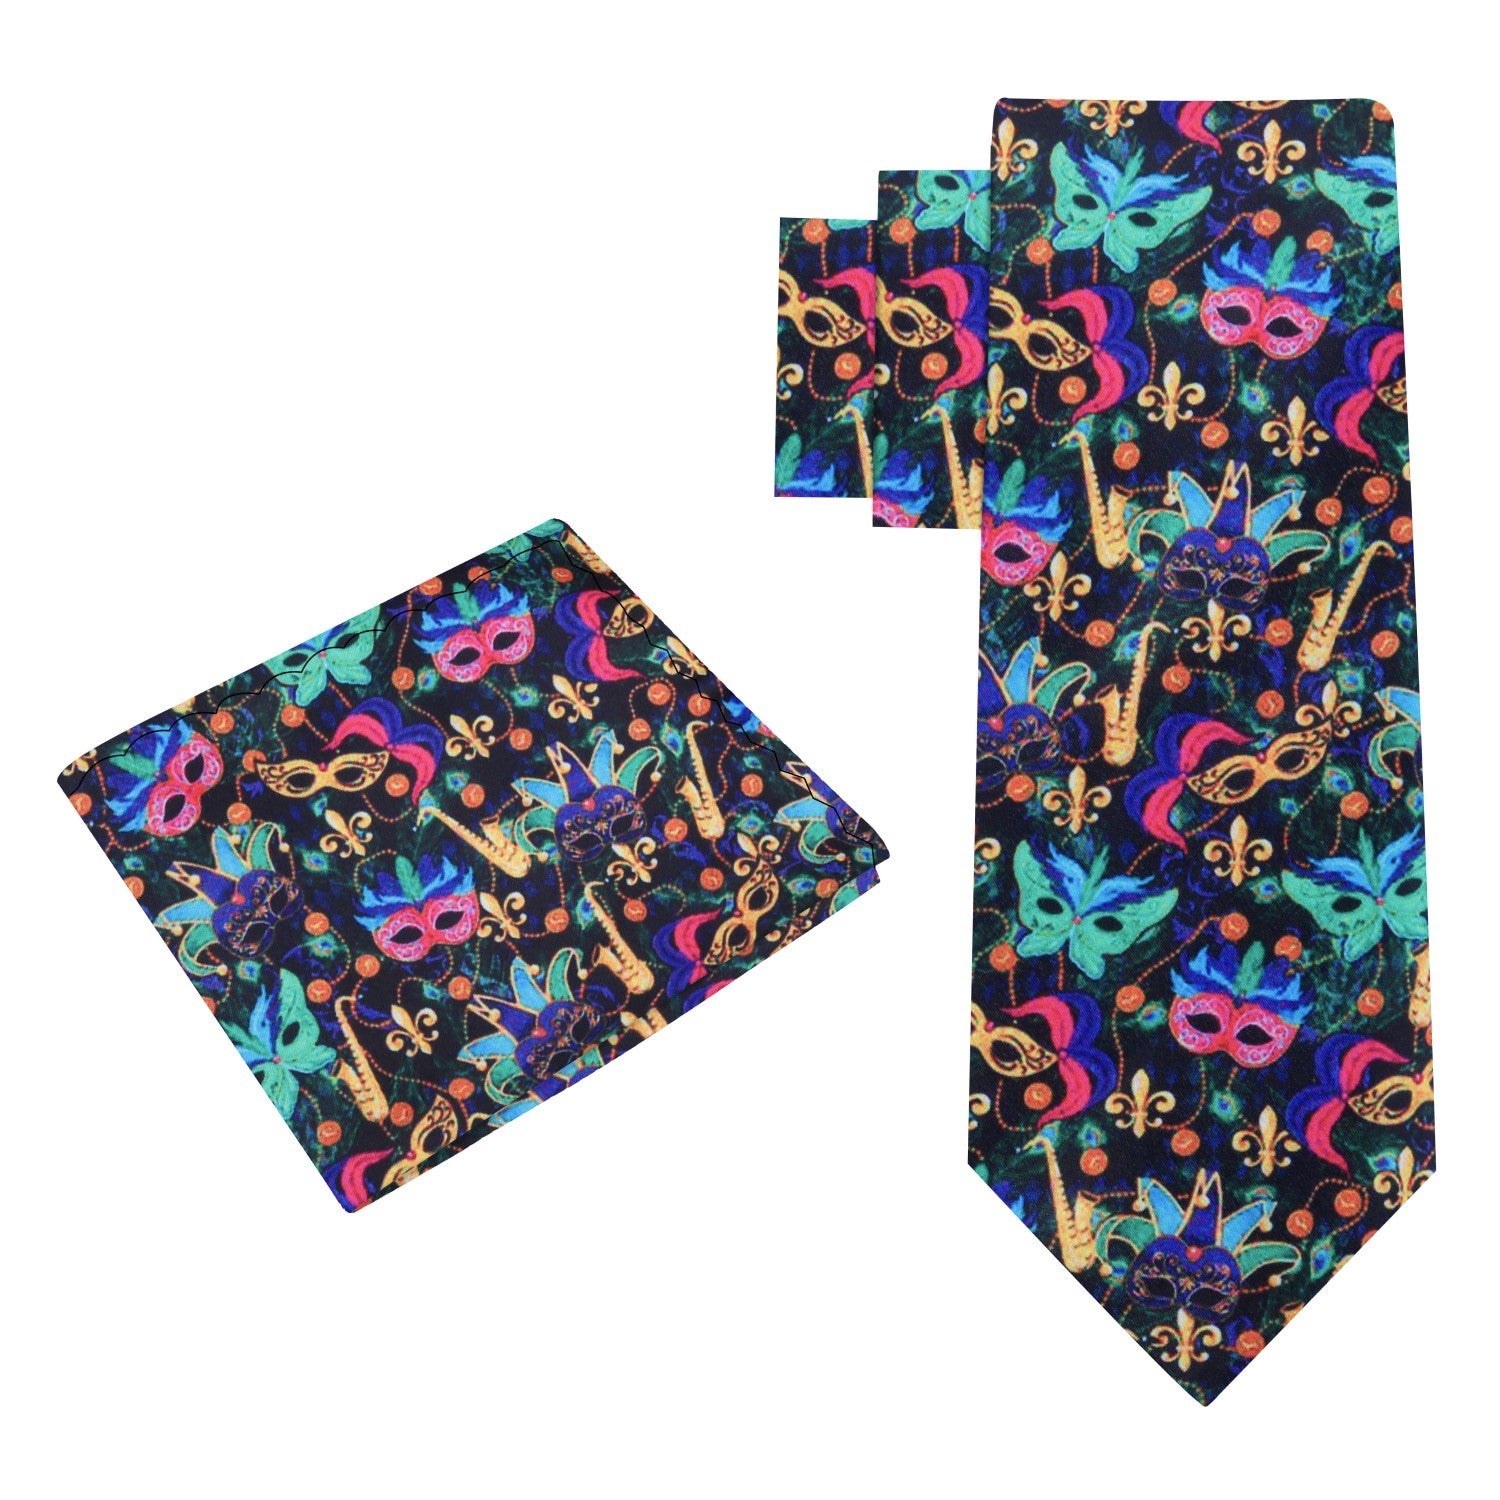 View 3: Black, Blue, Green, Pink Mardi Gras Masks Tie and Square